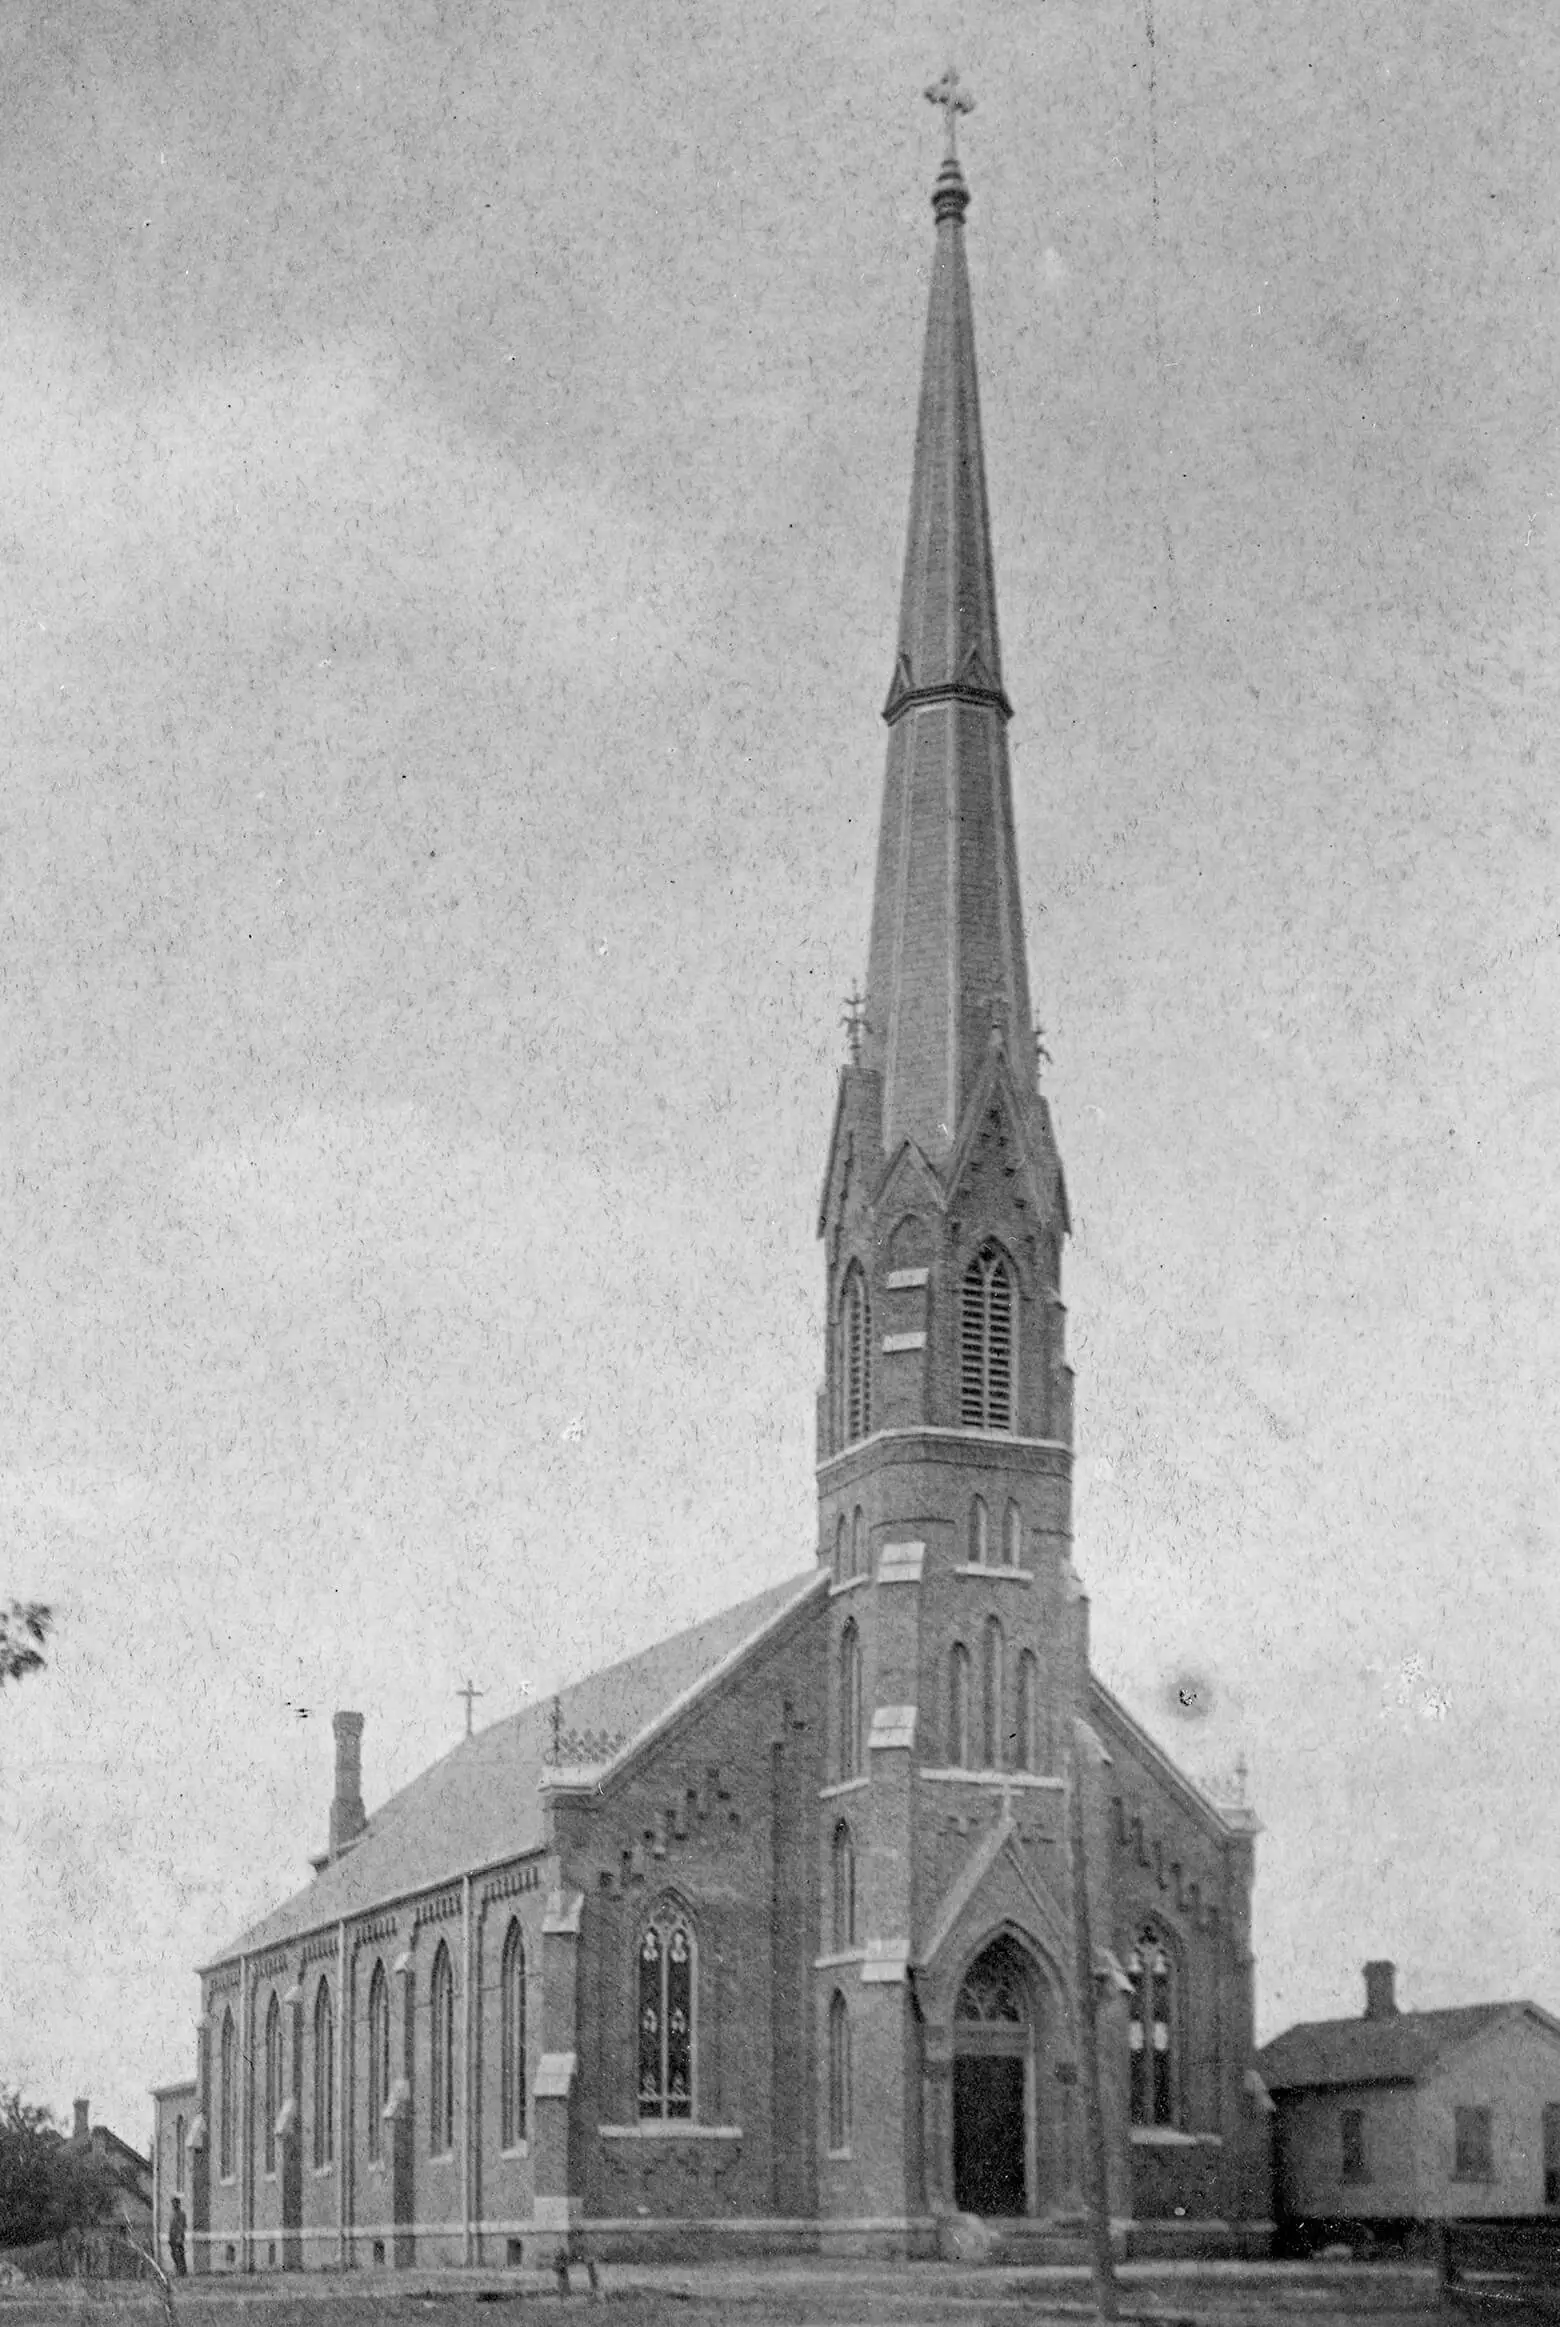 Large brick church with massive pointy steeple.